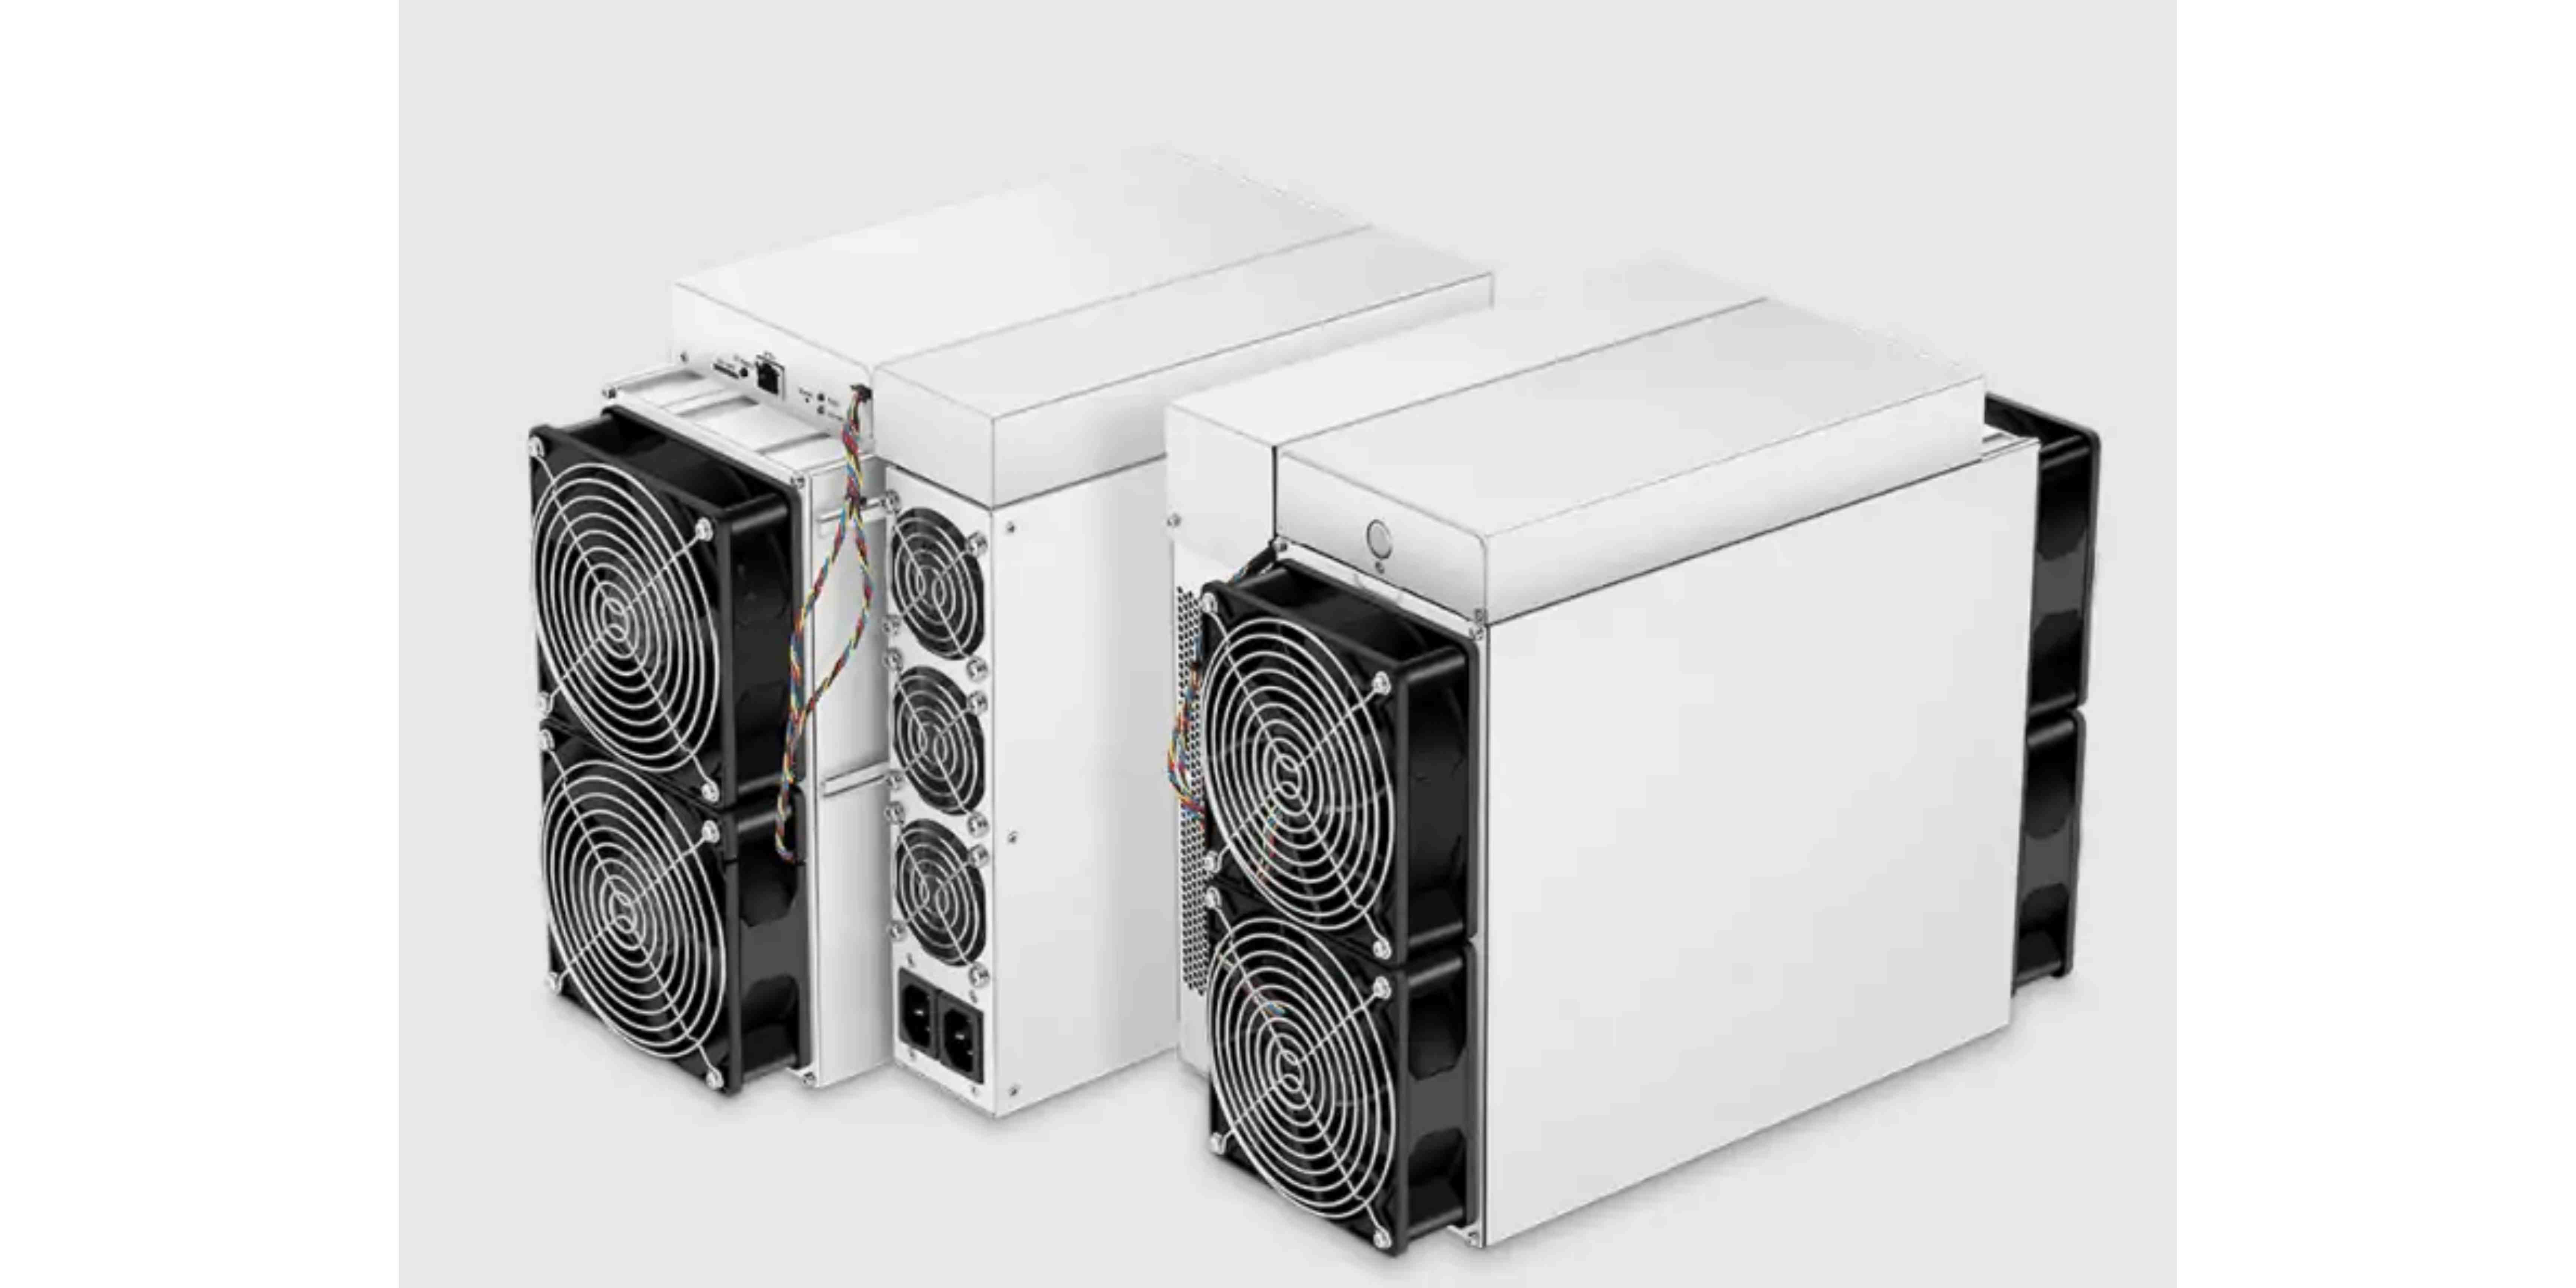 The Difference Of Bitmain Antminer S19 Pro Mining Hashrate Compared To Antminer S19